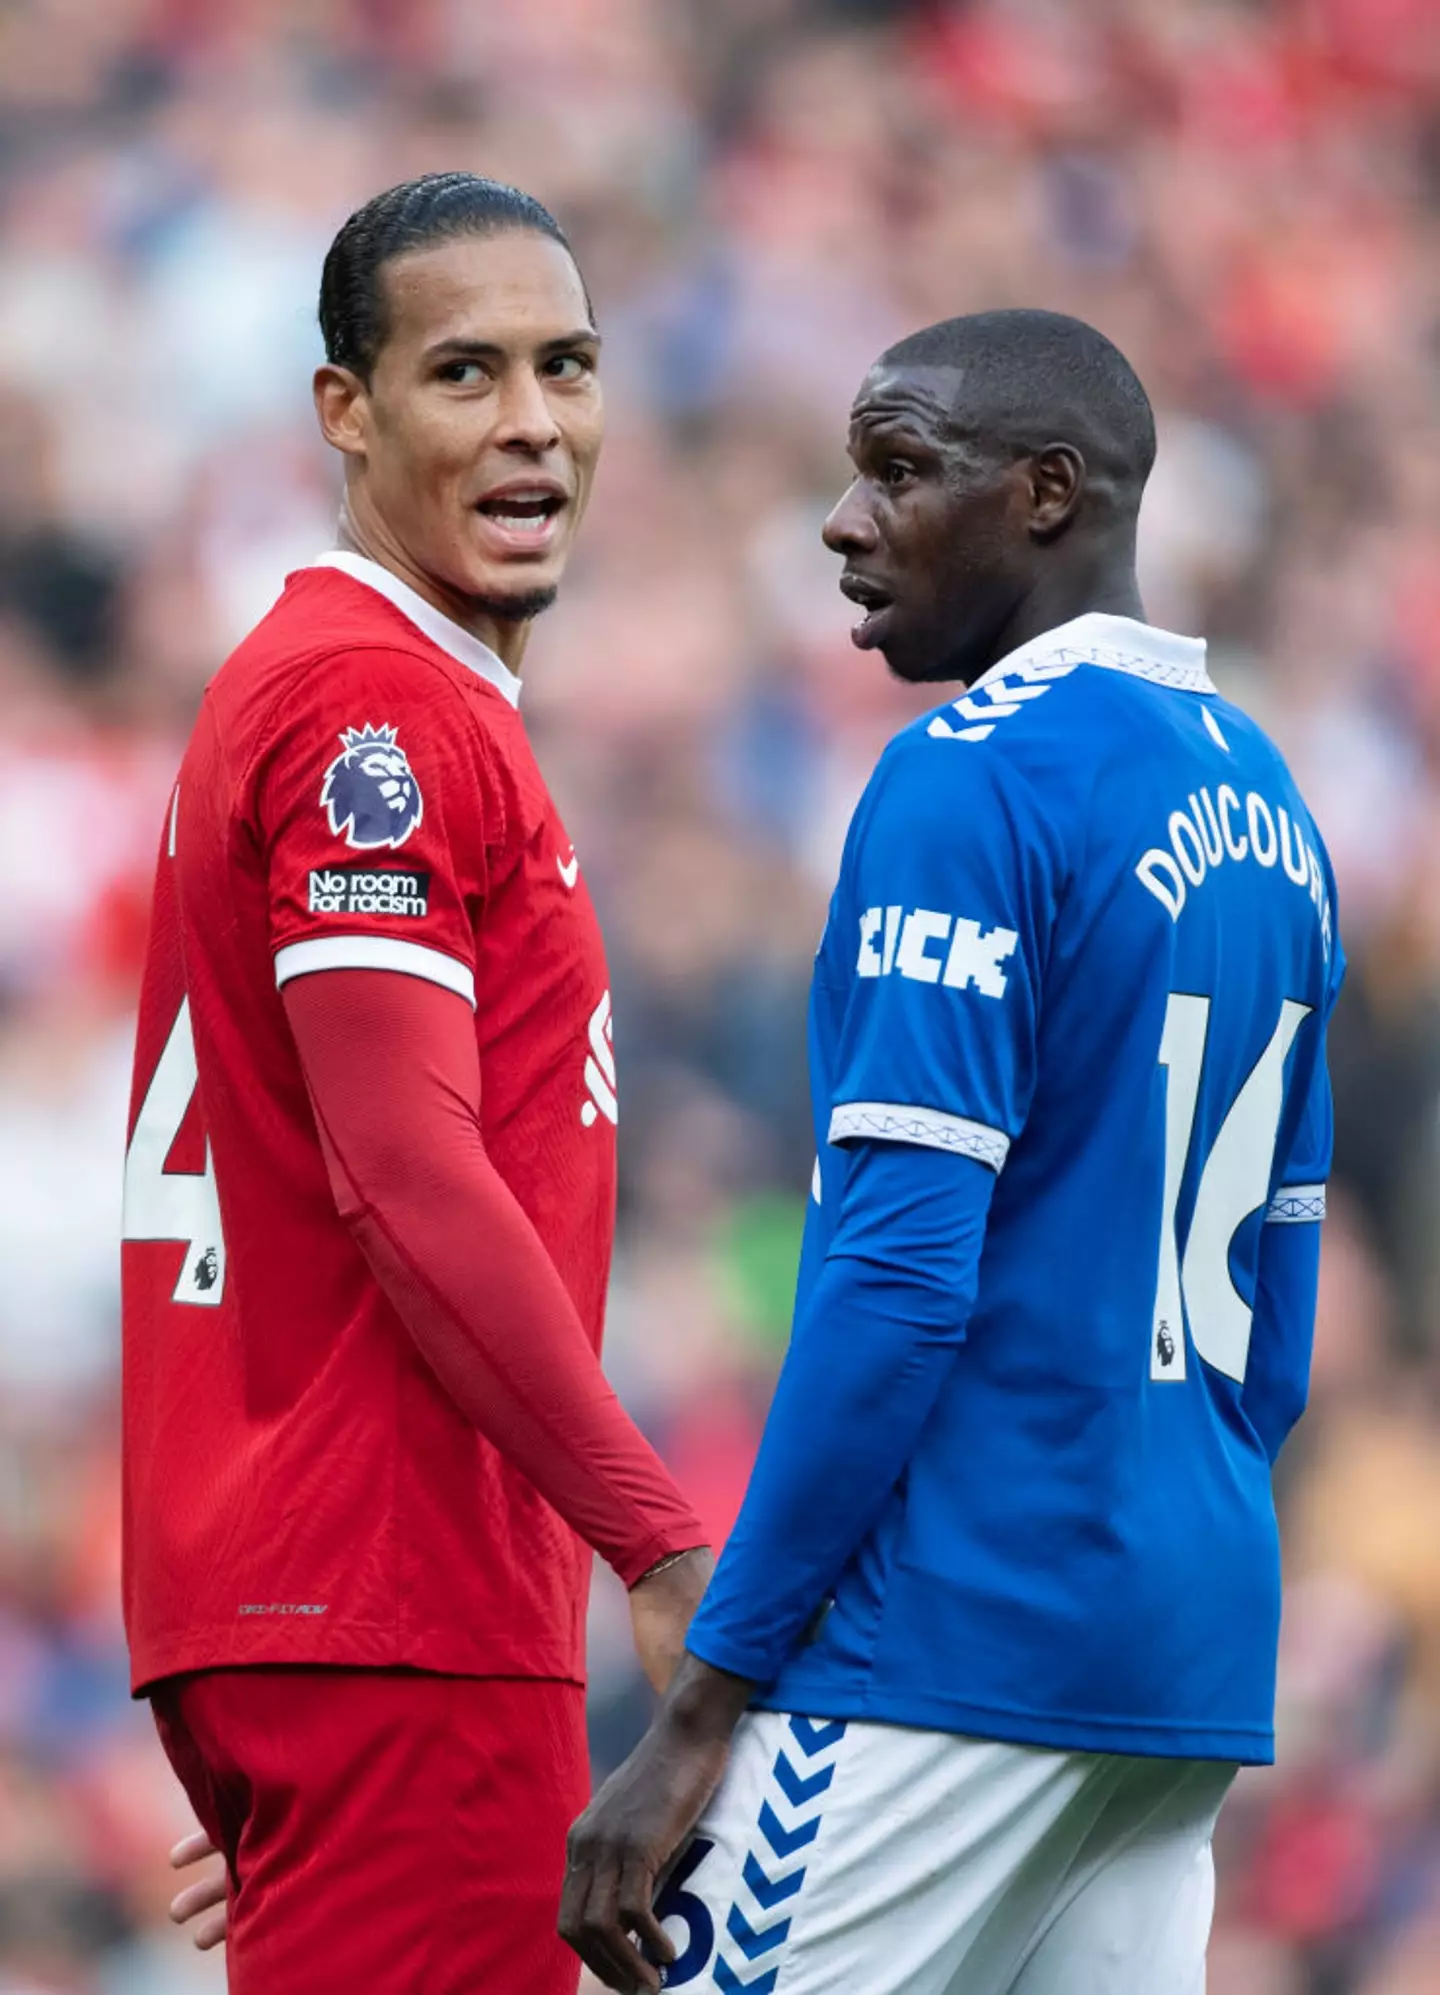 Liverpool will now face Everton on April 24 (Image: Getty)